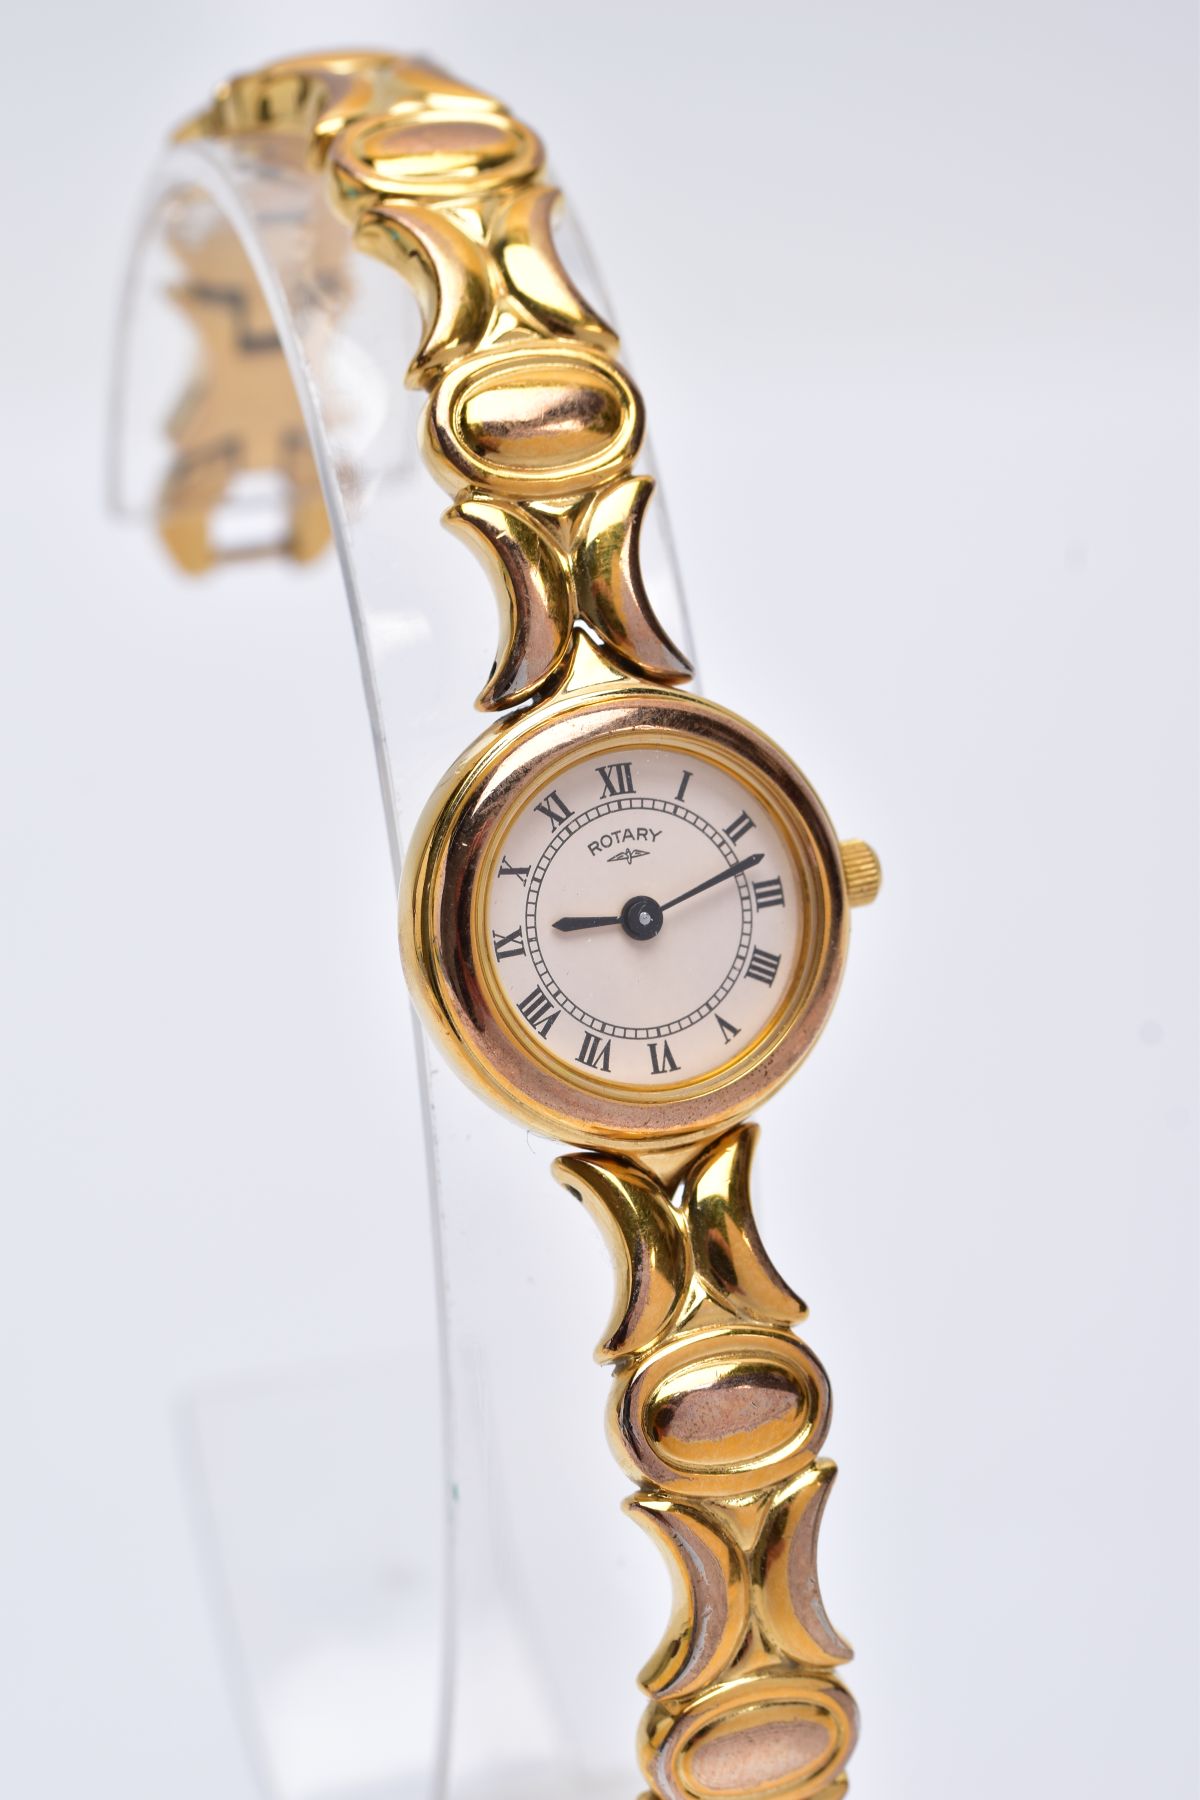 A LADY'S 'ROTARY' WRISTWATCH, quartz movement, round cream dial signed 'Rotary', Roman numerals, - Image 2 of 6